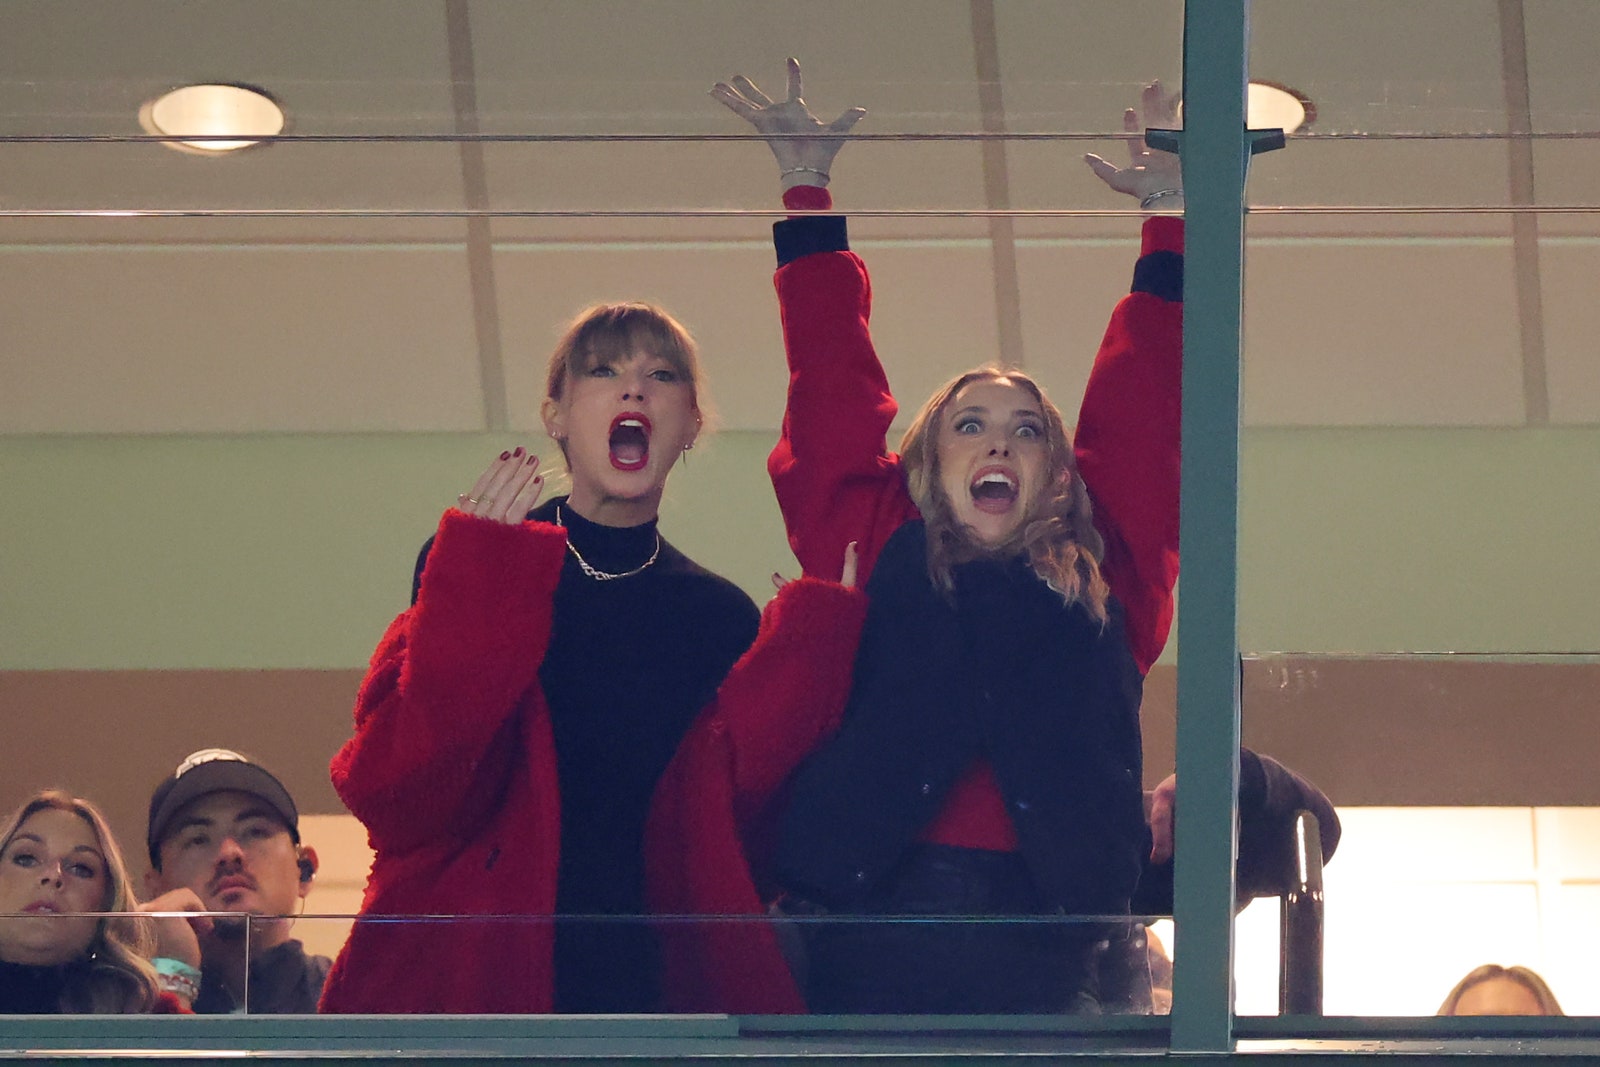 Taylor Swift and Brittany Mahomes cheer on the Kansas City Chiefs at Lambeau Field in Green Bay Wisconsin.